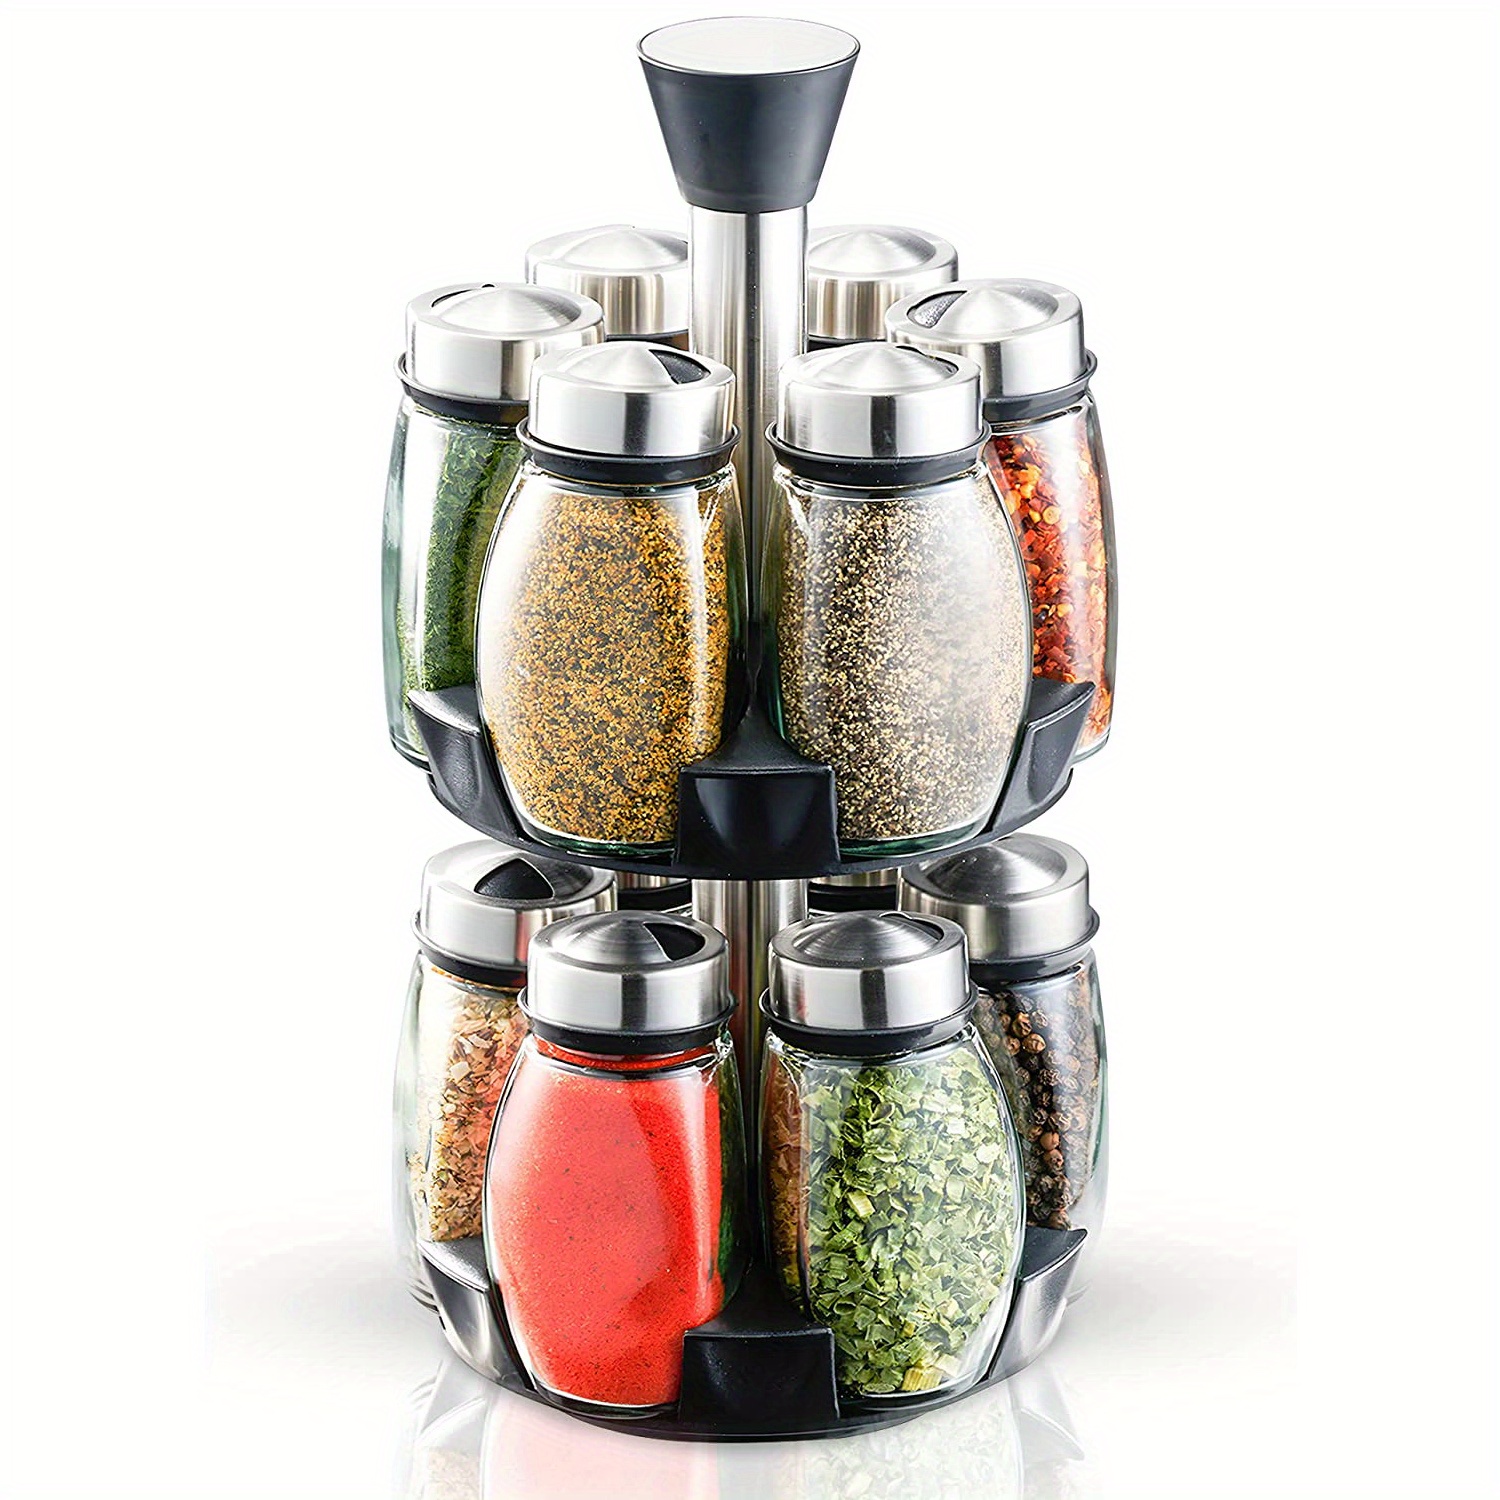 KOKM Revolving Spice Rack, 6-Jar Seasoning Organizer Holder 360° Rotation  Shelf Tower Set with 6 Glass Spice Refill Containers Jars for Cabinet